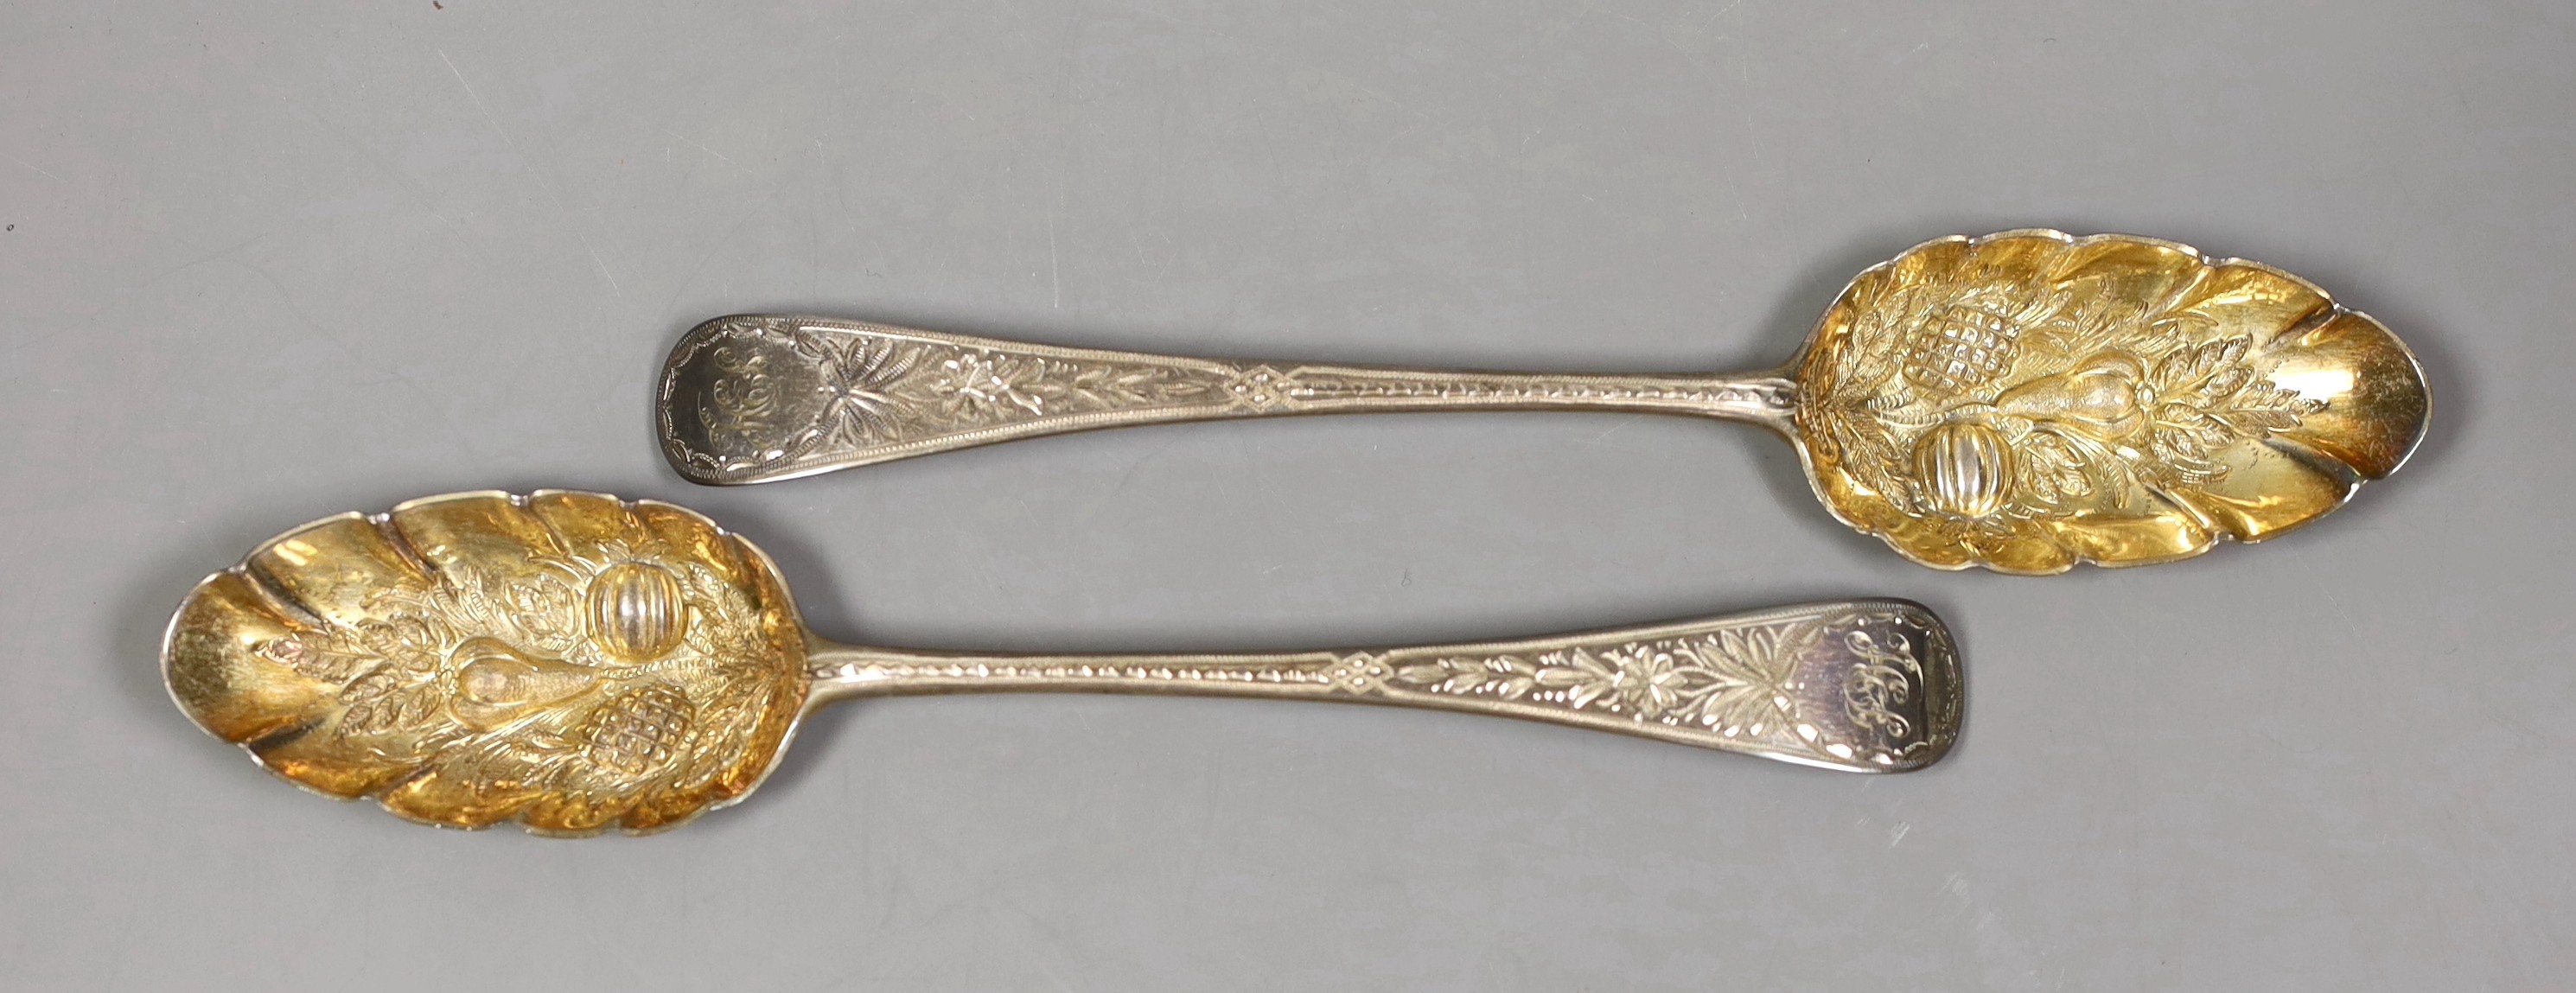 A pair of George III silver Old English pattern 'berry' spoons, Godbehere, Wigan & Bolt, London, 1803, 21.9cm, 132 grams.                                                                                                   